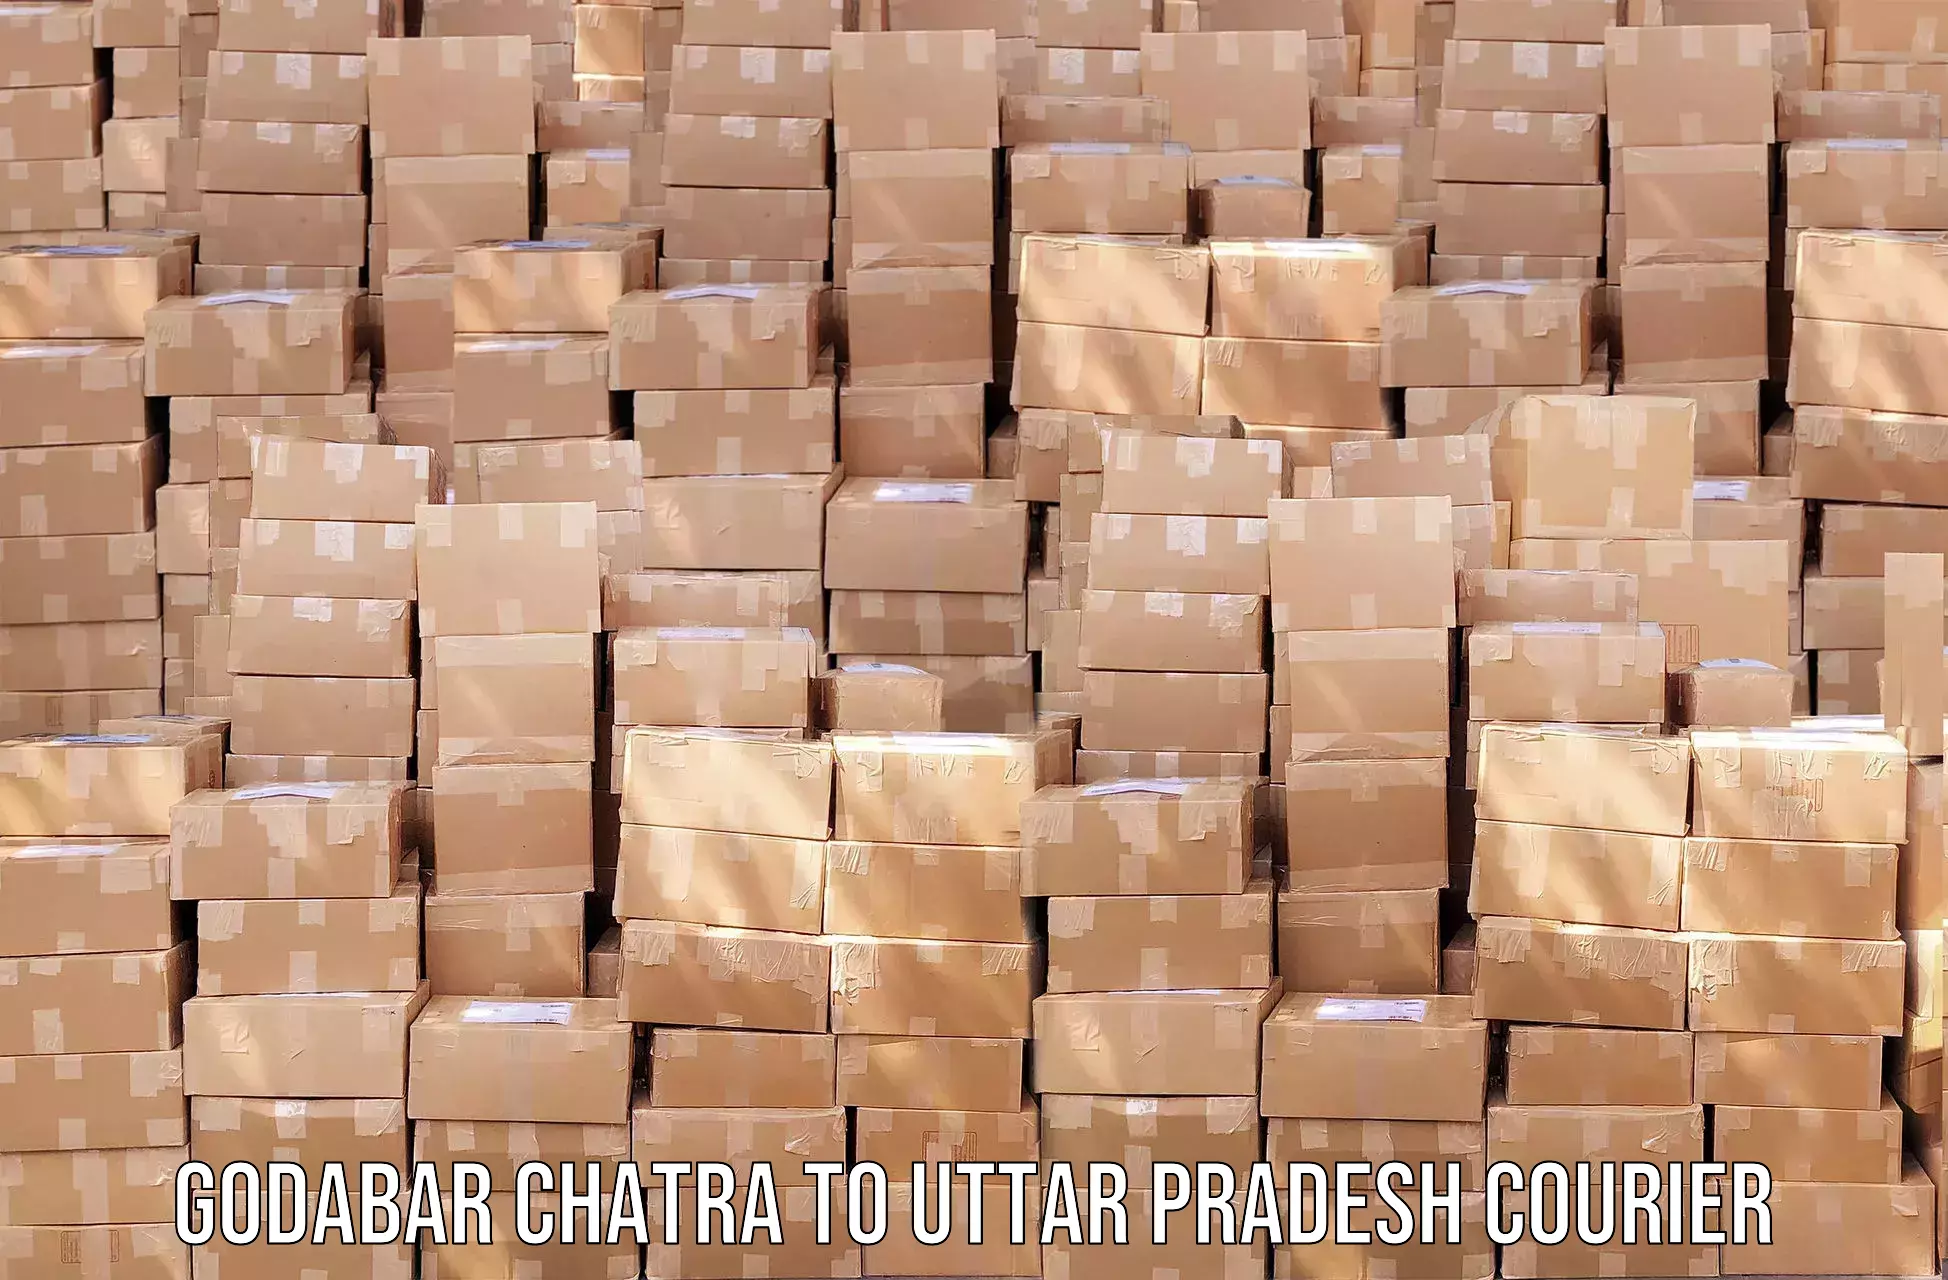 Multi-national courier services Godabar Chatra to Rudhauli